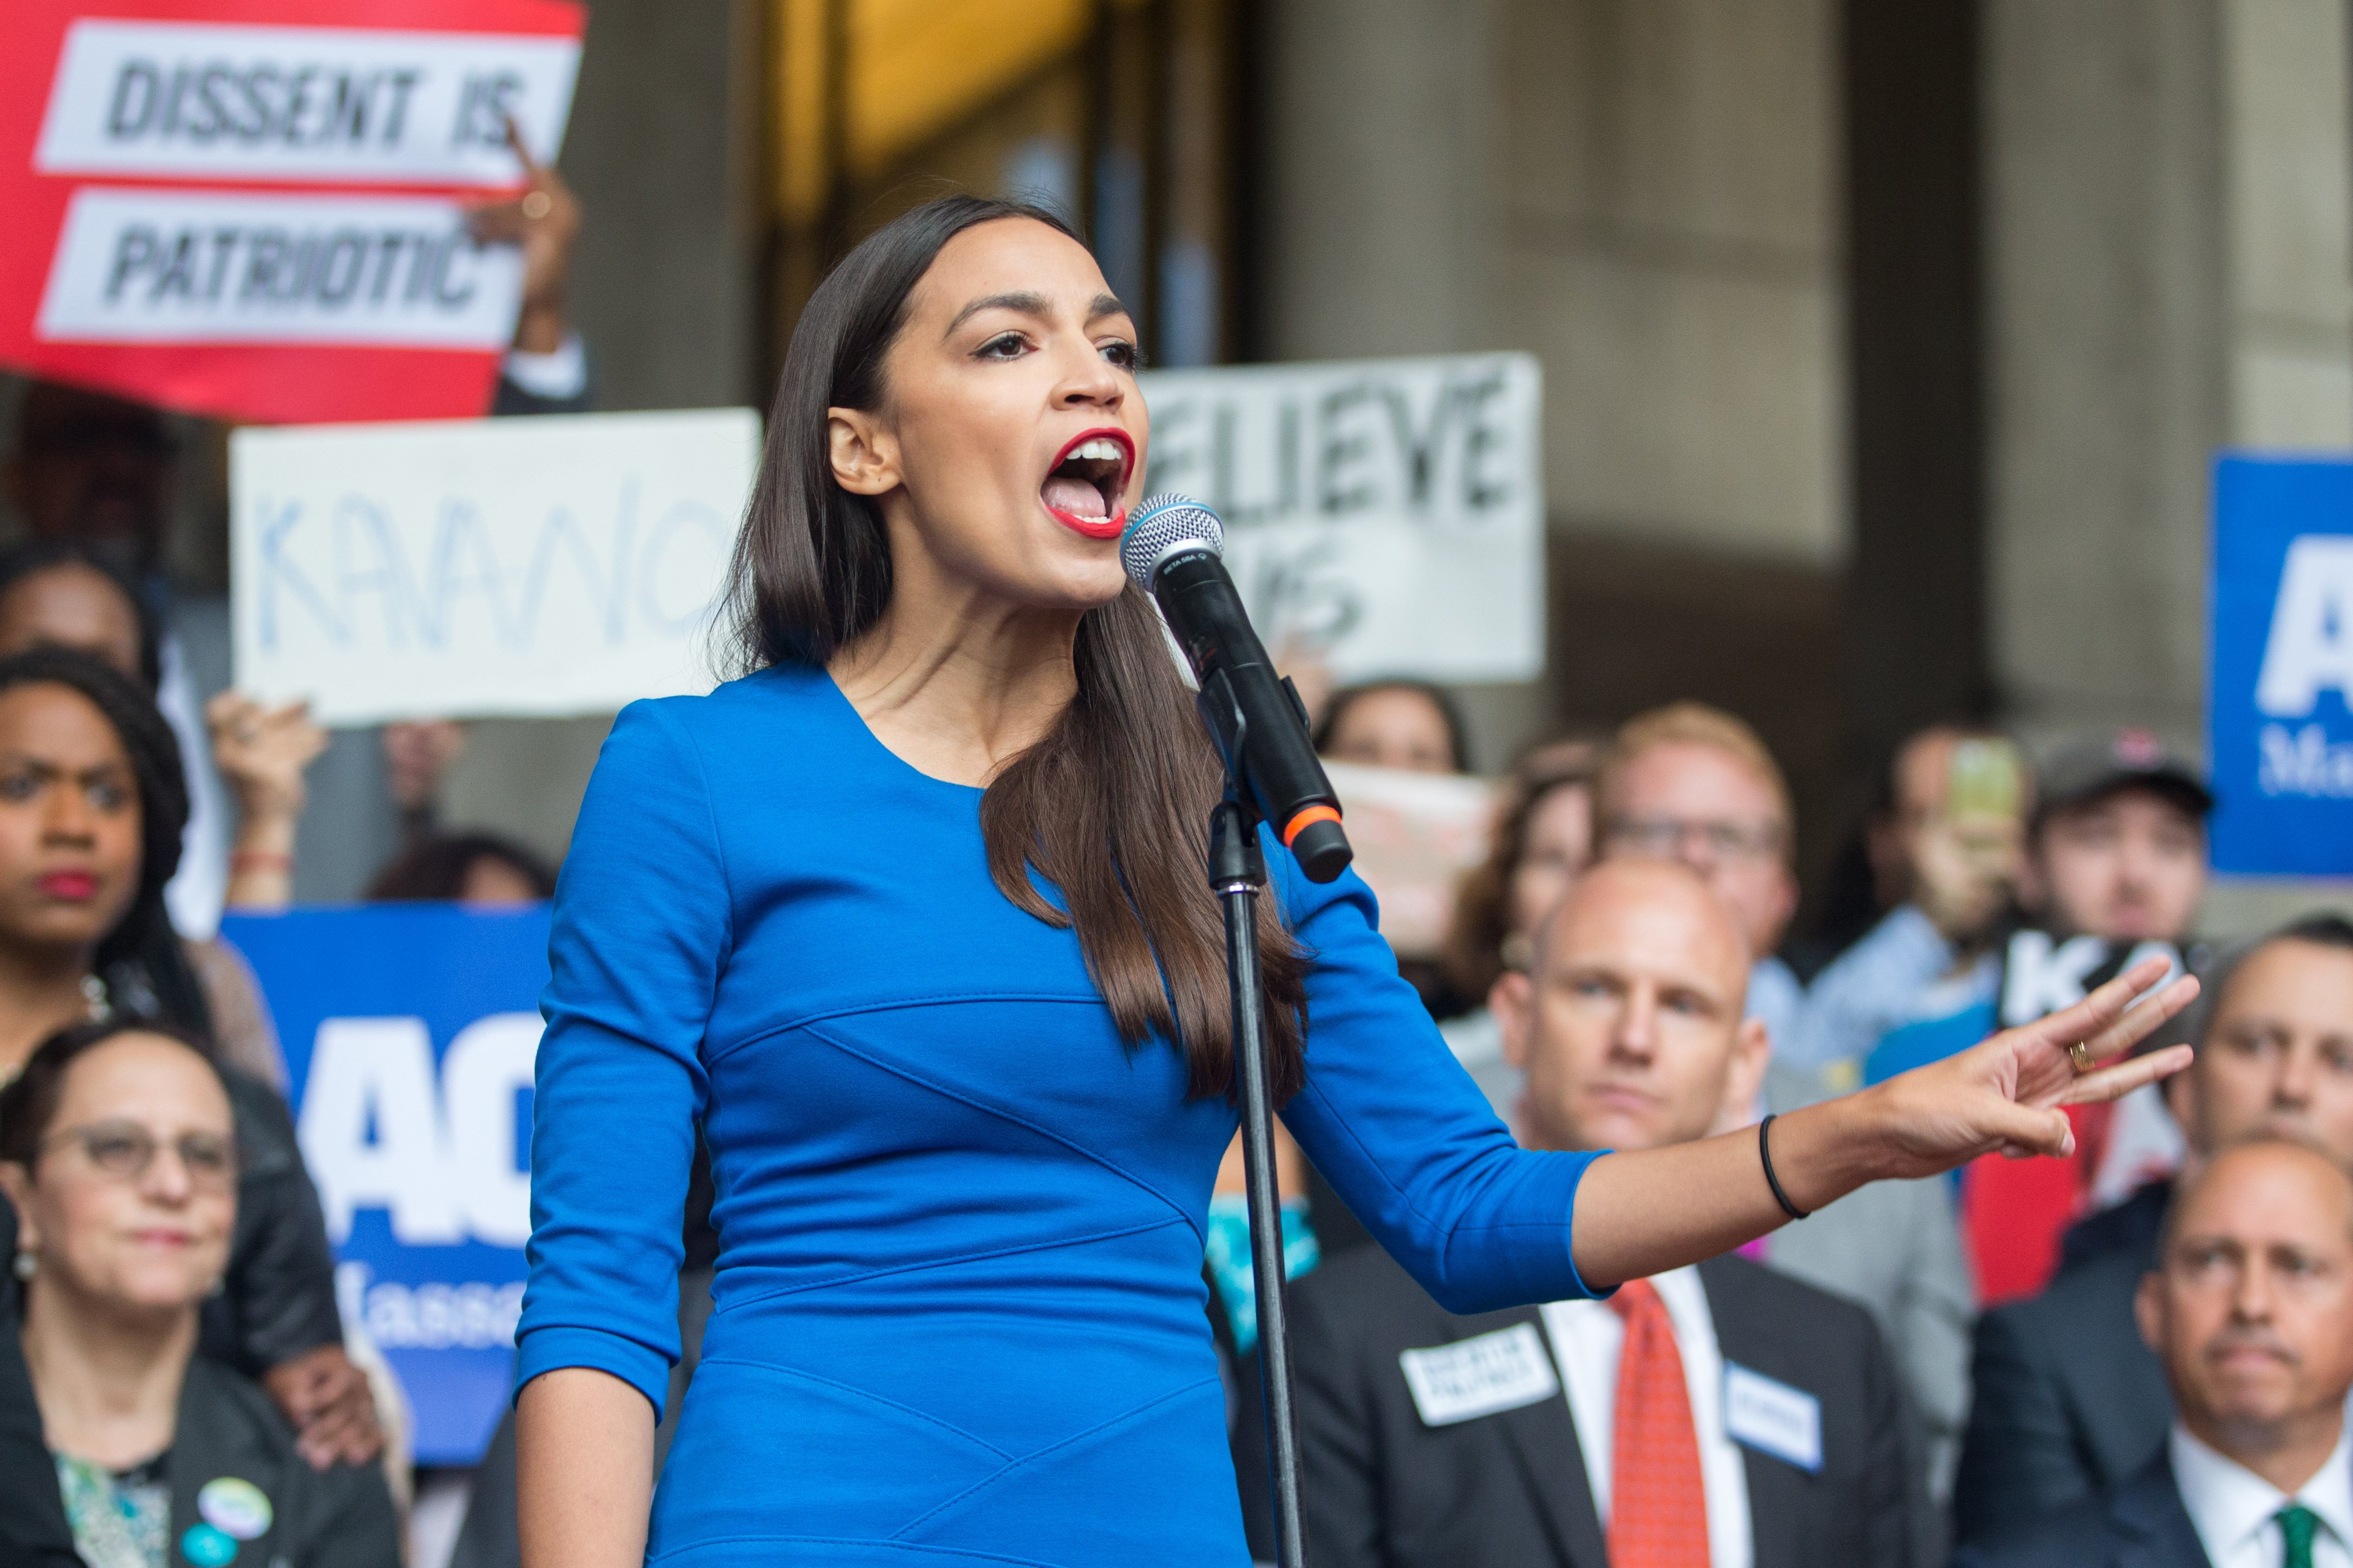 BOSTON, MA - OCTOBER 01: New York Democratic congressional candidate Alexandria Ocasio-Cortez speaks at a rally calling on Sen. Jeff Flake (R-AZ) to reject Judge Brett Kavanaugh's nomination to the Supreme Court on October 1, 2018 in Boston, Massachusetts. Sen. Flake is scheduled to give a talk at the Forbes 30 under 30 event in Boston after recently calling for a one week pause in the confirmation process to give the FBI more time to investigate sexual assault allegations. (Photo by Scott Eisen/Getty Images)